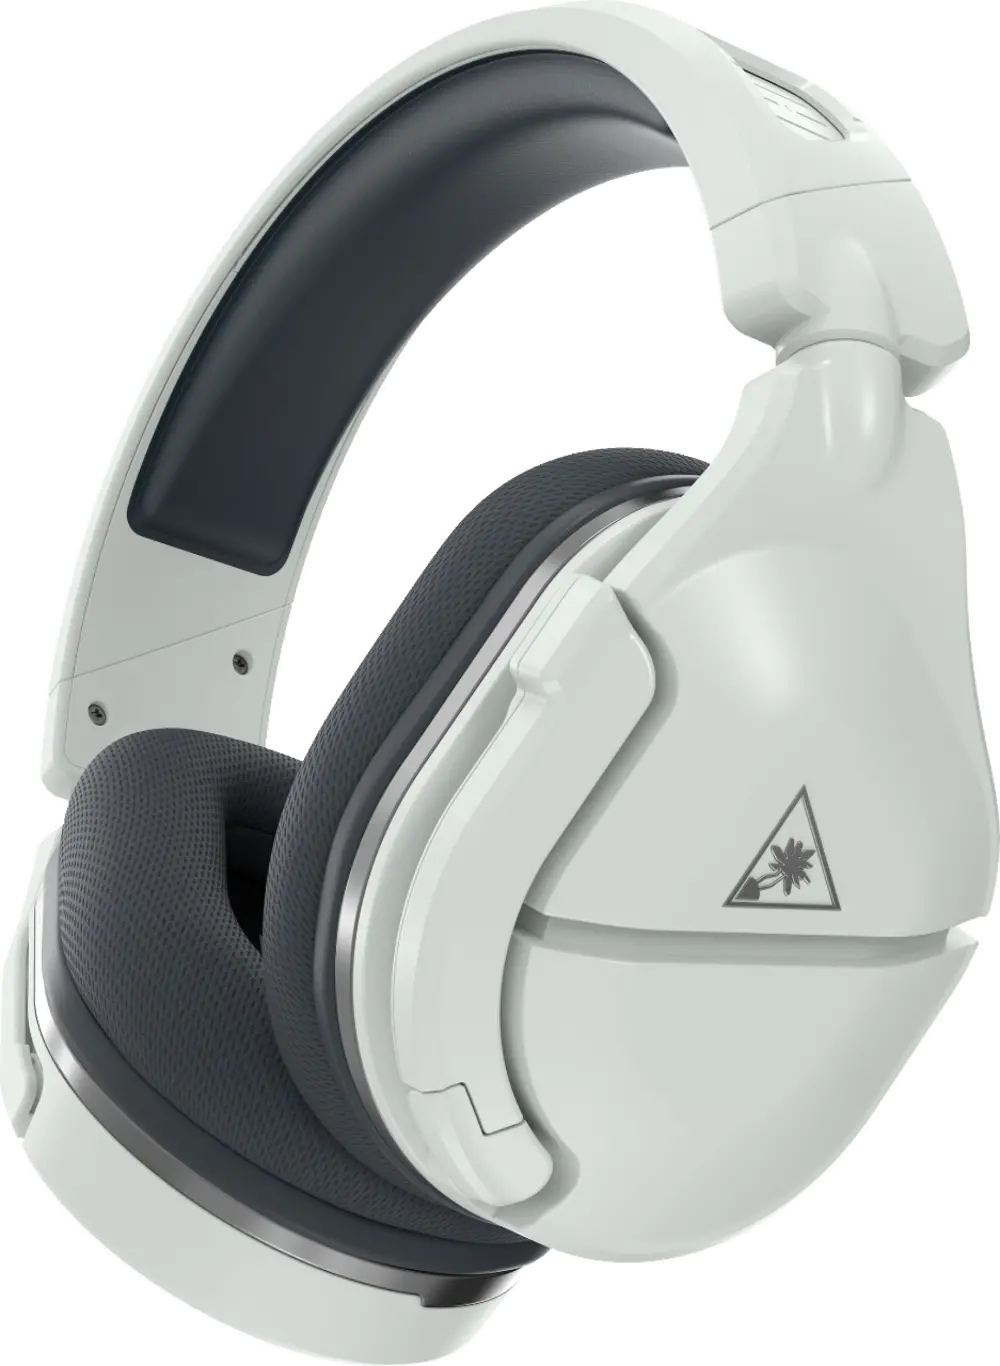 TBS/STEALTH_600-2PSW Turtle Beach Stealth 600 Gen 2 White Wireless Gaming Headset - PS4, PS5-1